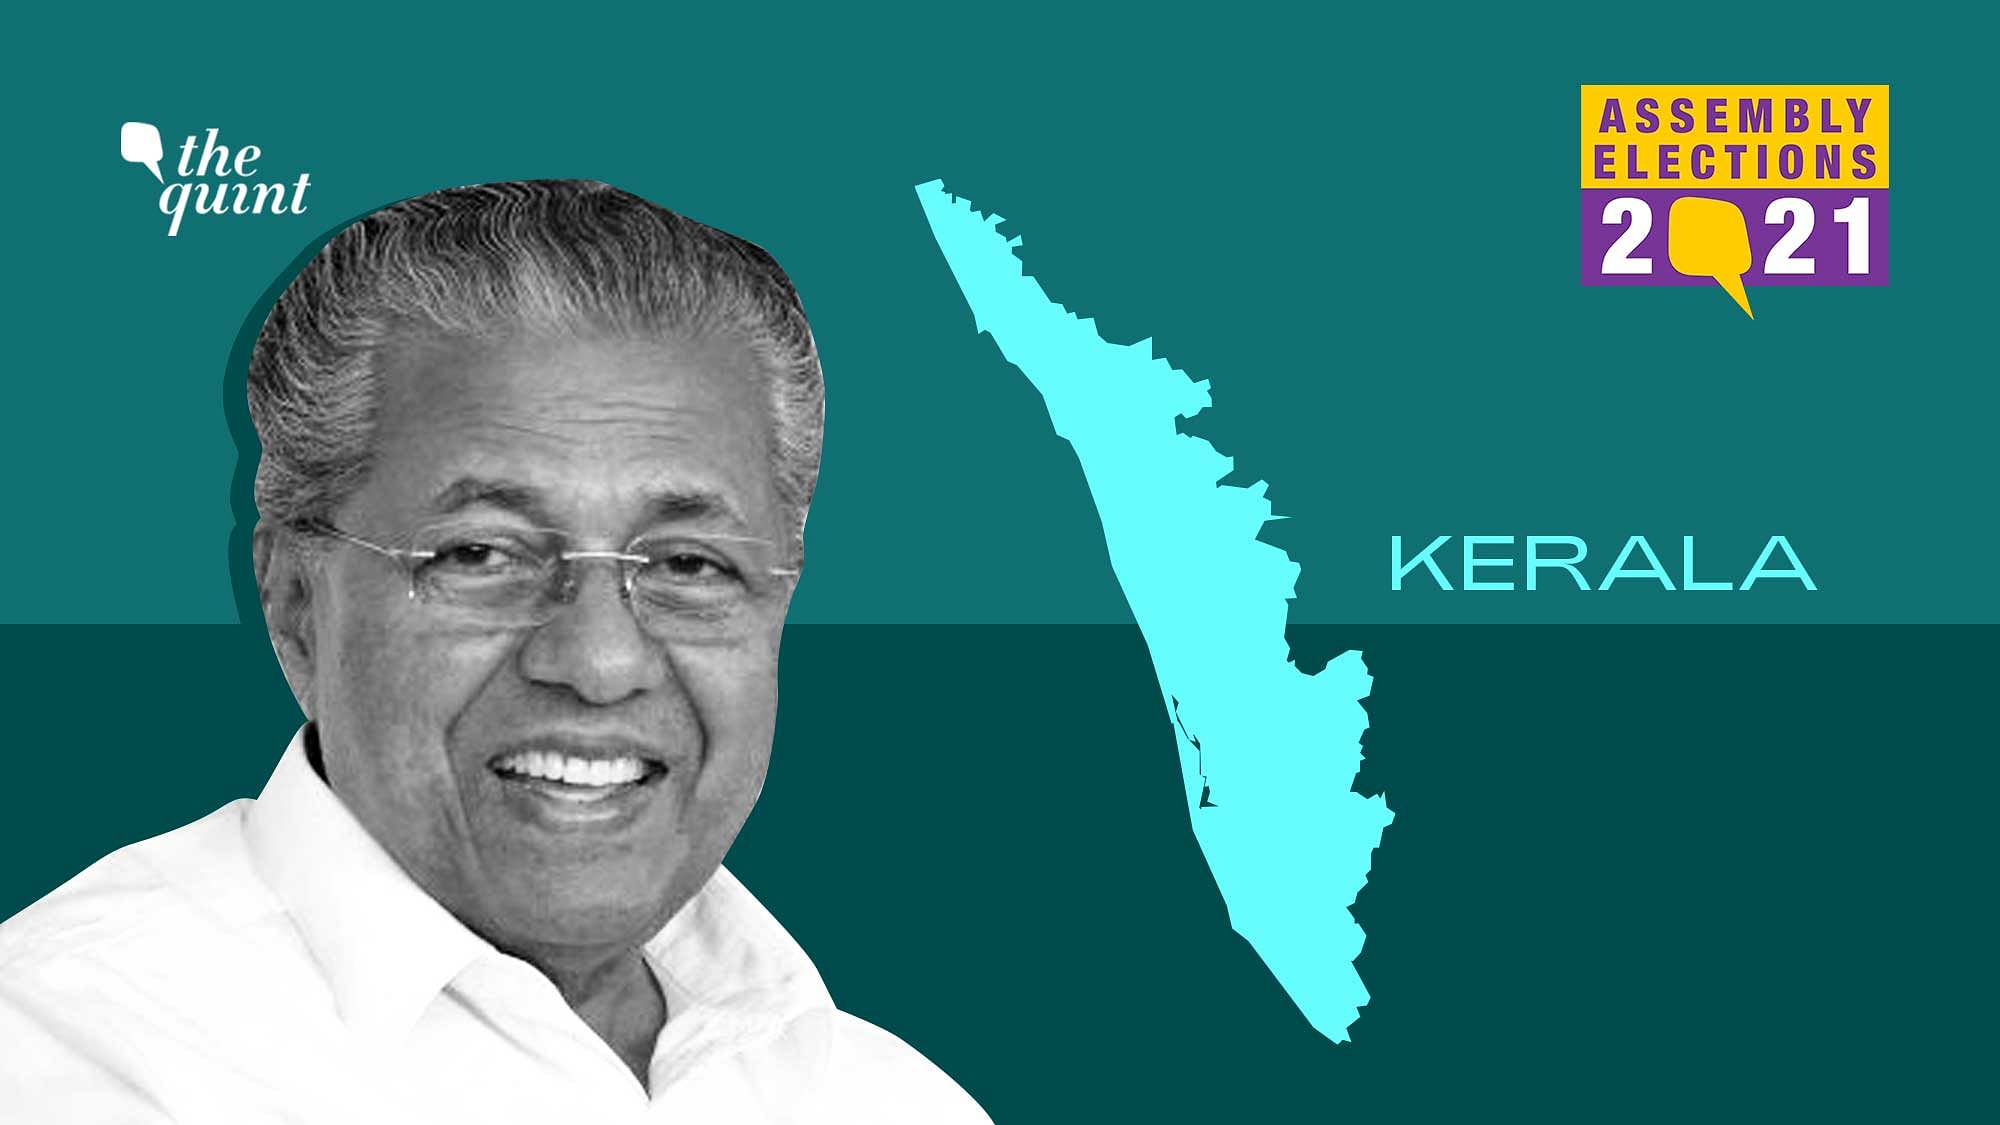 <div class="paragraphs"><p>Pinarayi Vijayan of LDF is expected to be re-elected to power, squashing UDF hopes of returning to power, exit polls suggest.&nbsp;</p></div>